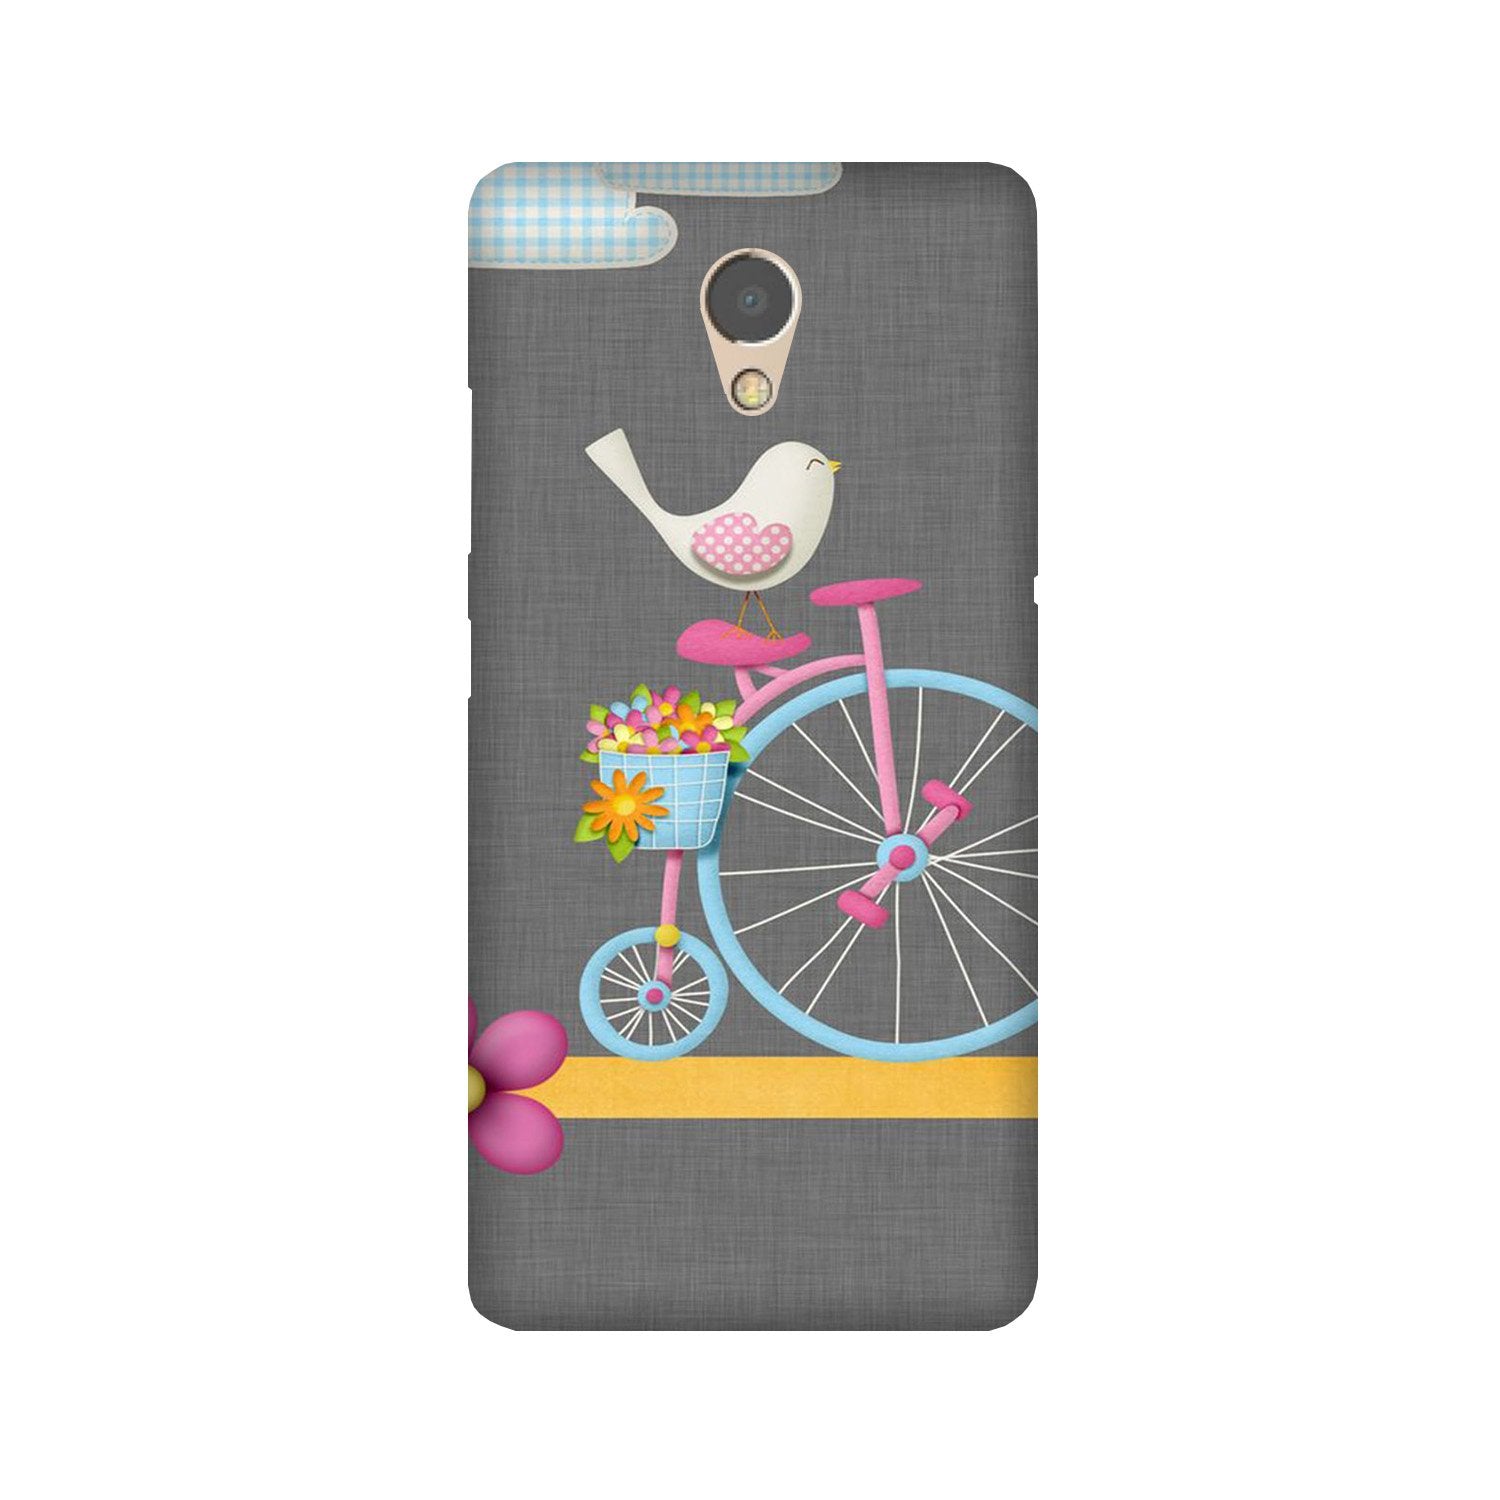 Sparron with cycle Case for Lenovo P2